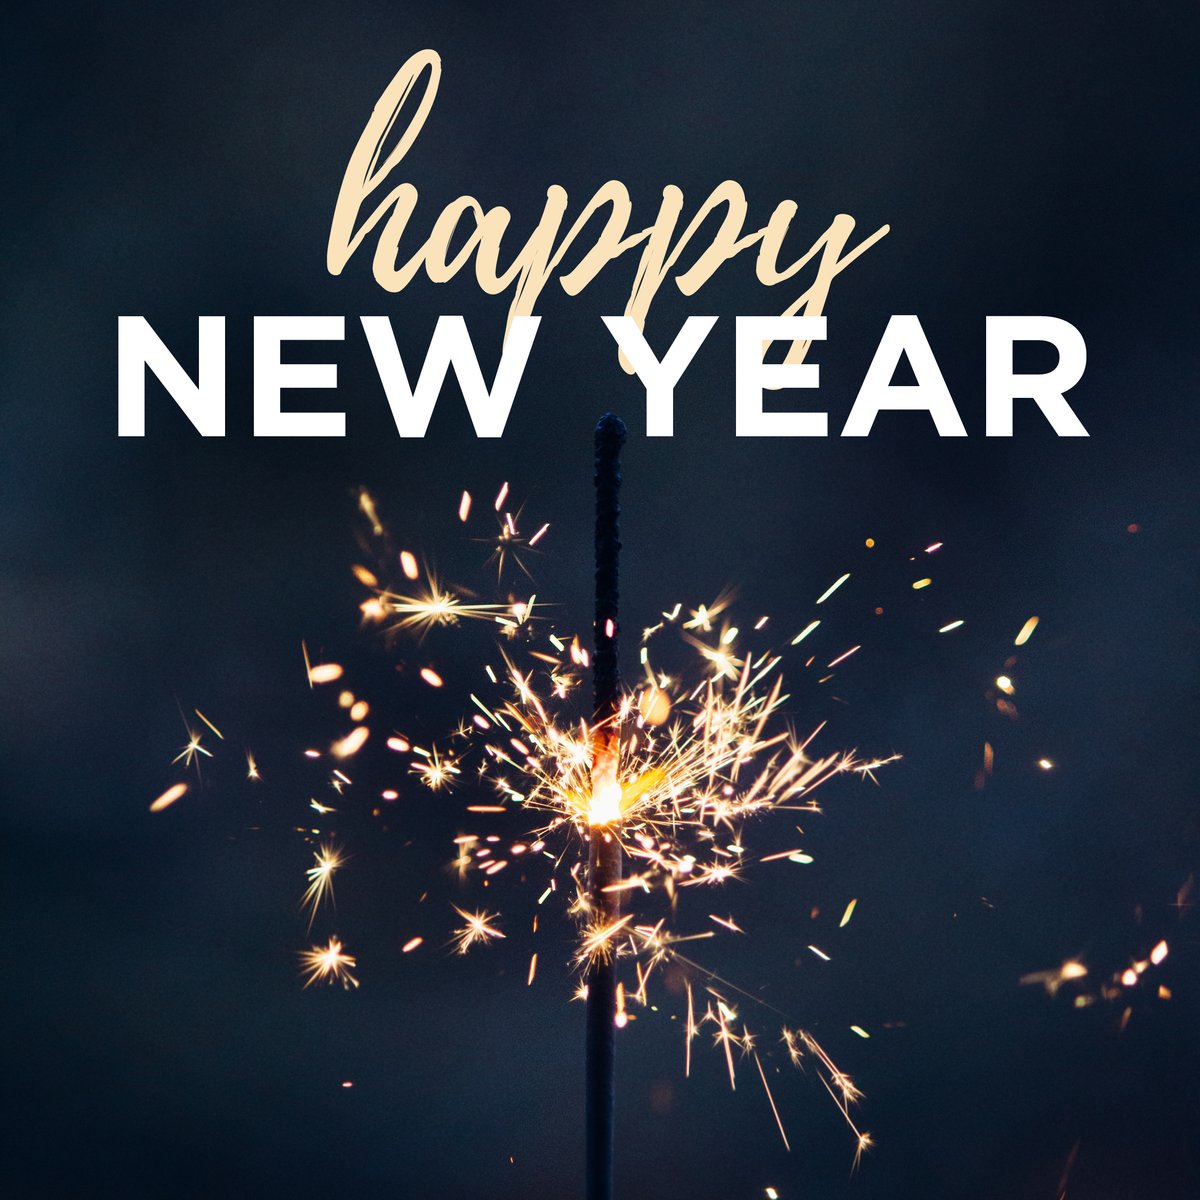 I hope your New Year starts bright, and it continues to shine throughout the year!

Serina Lowden
(209) 304-5841
serinalowden@allcityhomes.com
DRE #01365745

'Hearing you Lowden Clear!'
.
.
#happynewyear #newyear #2022 #goodbye2021 #notivation #allcityhomes #serinalowden